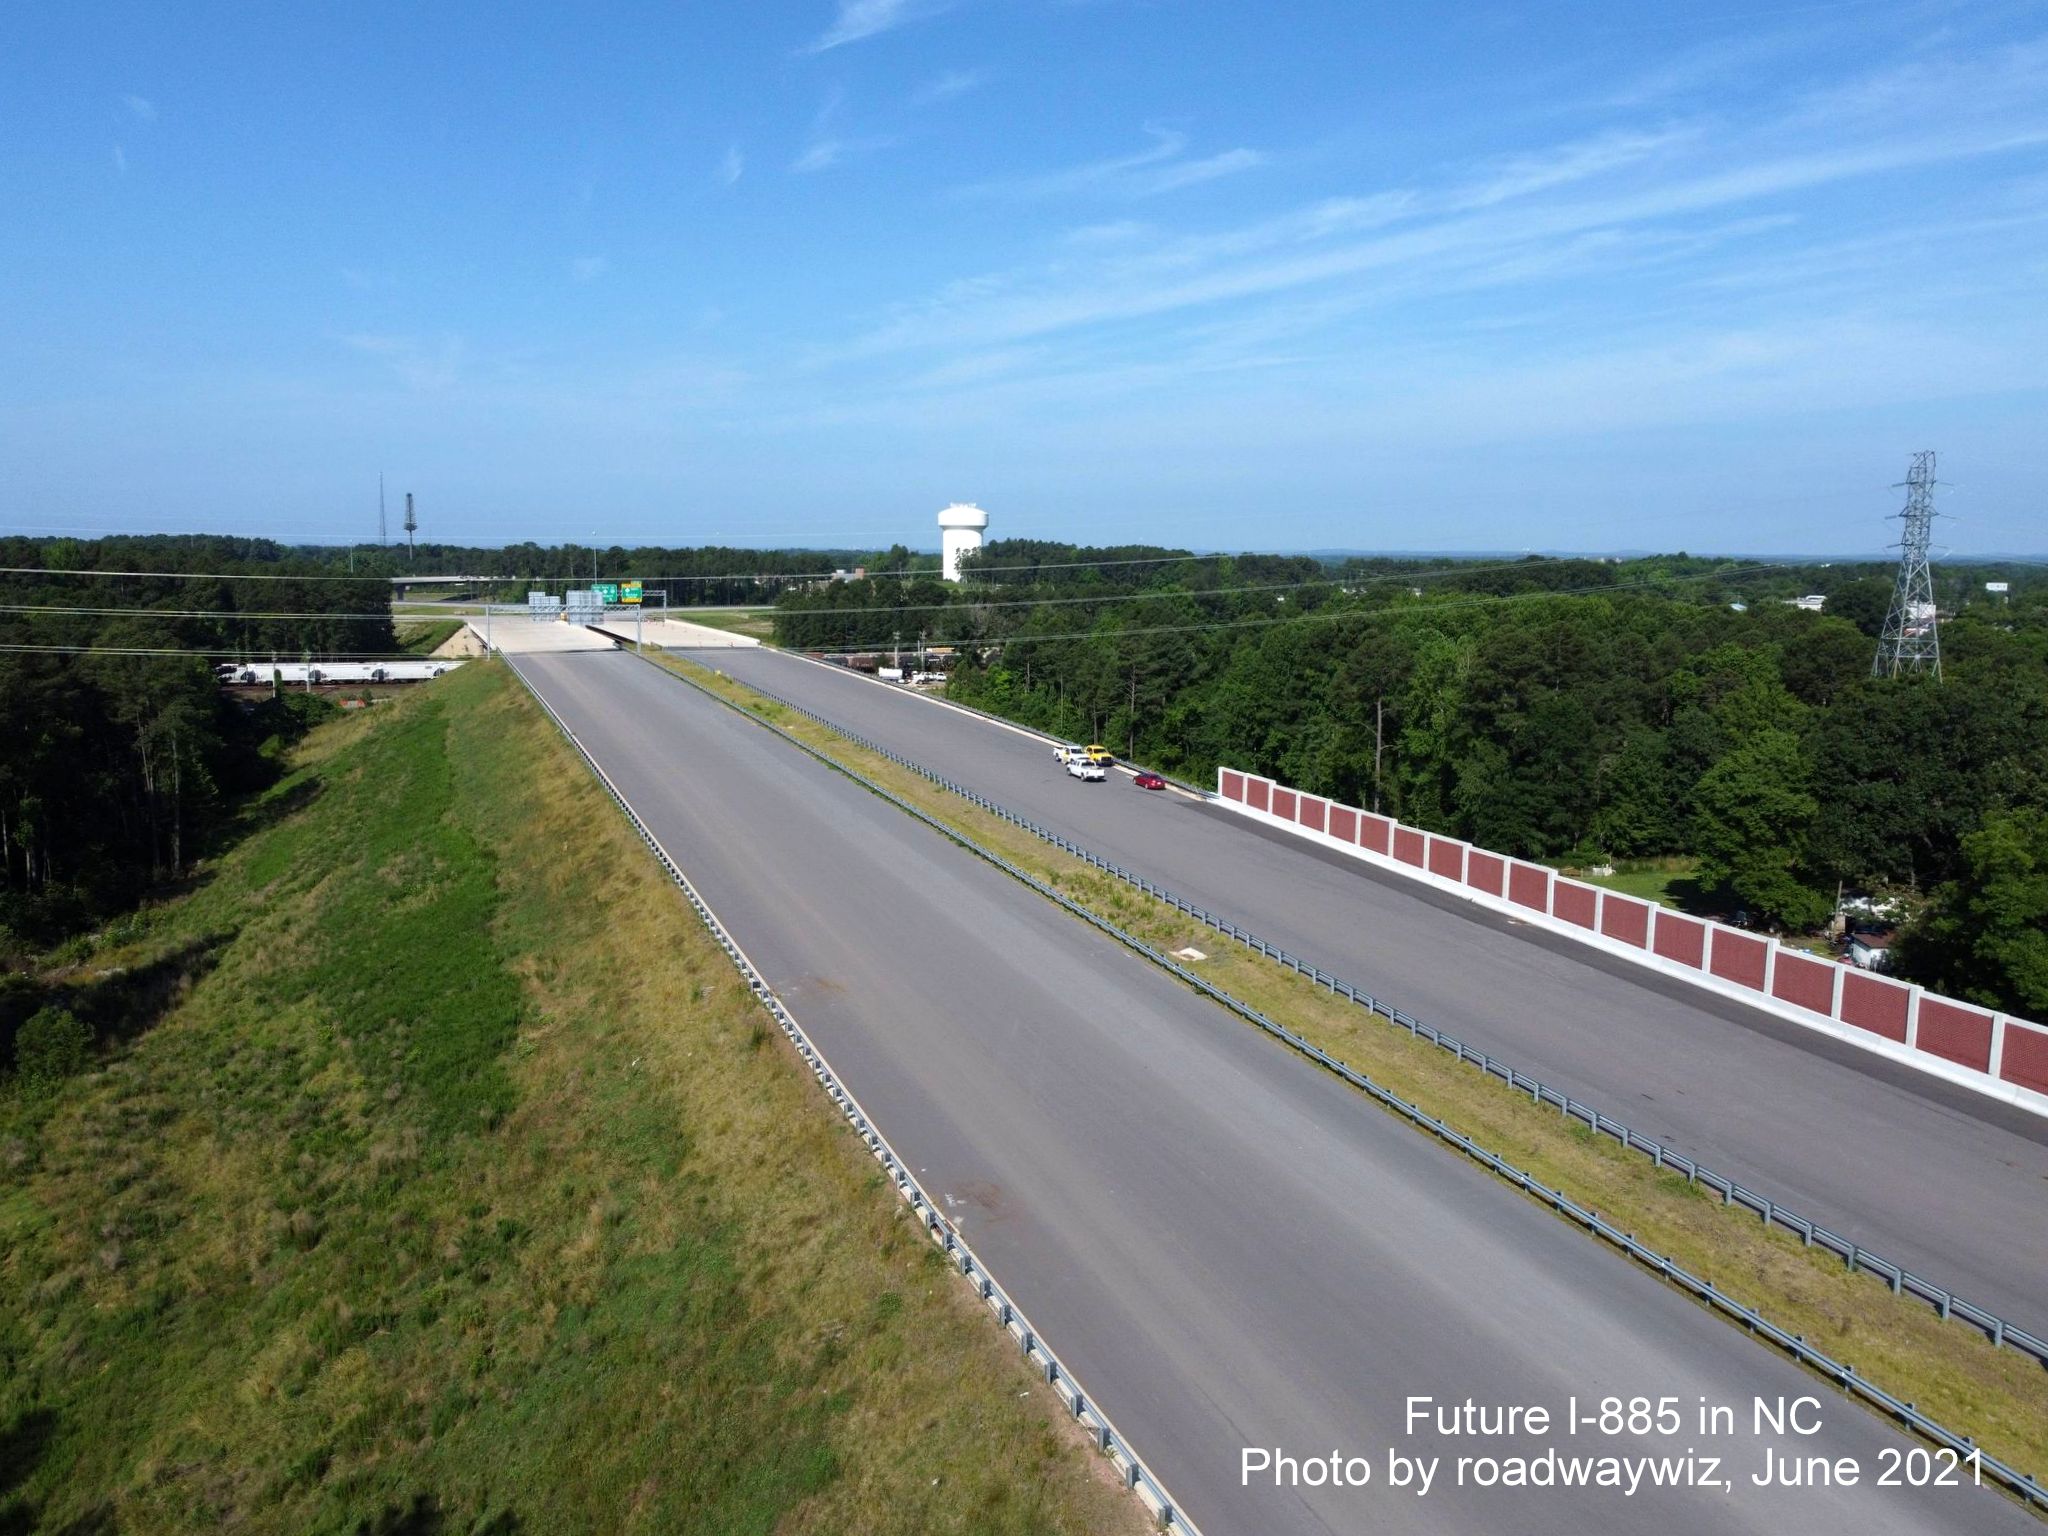 Image taken looking closely at the unopened I-885/East End Connector roadway in Durham, by roadwaywiz, June 2021